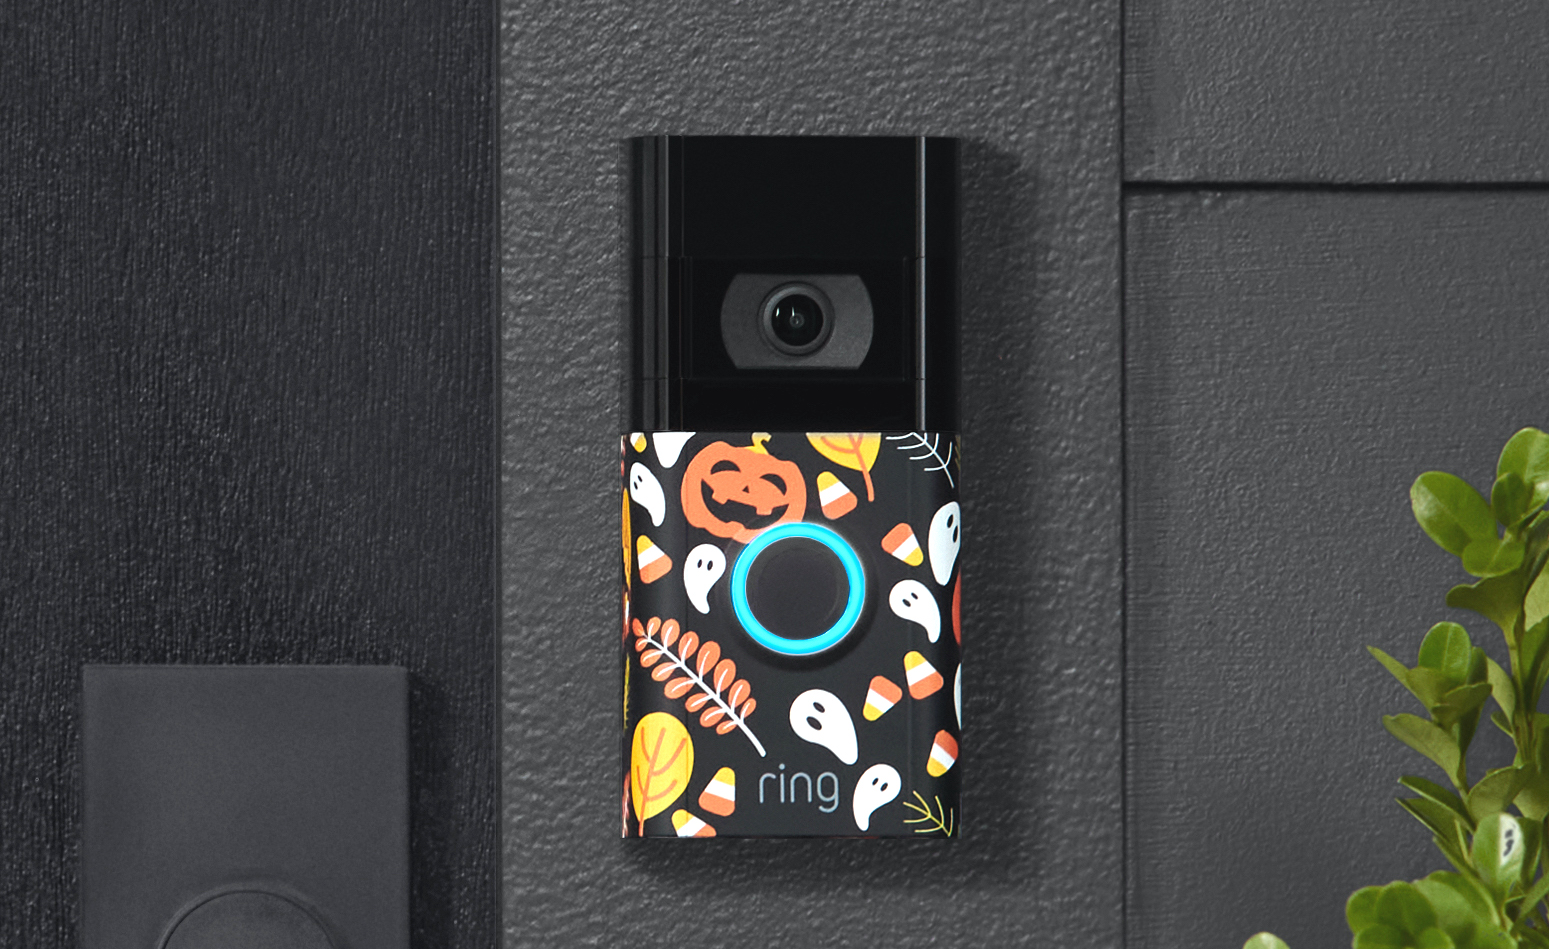 Ring video doorbell with Halloween face plate